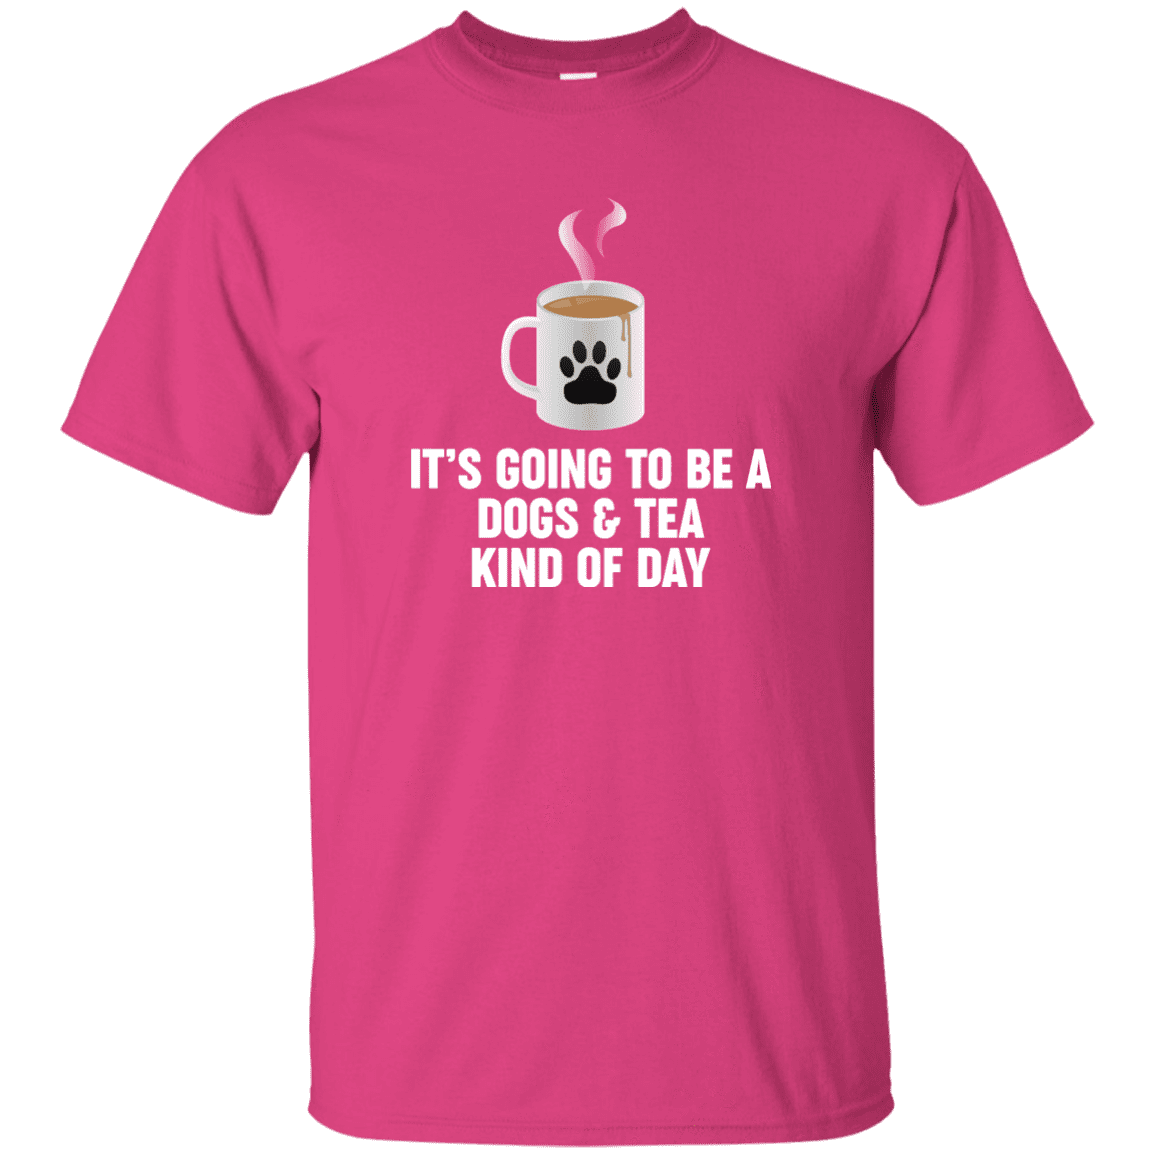 Dogs And Tea - T Shirt.